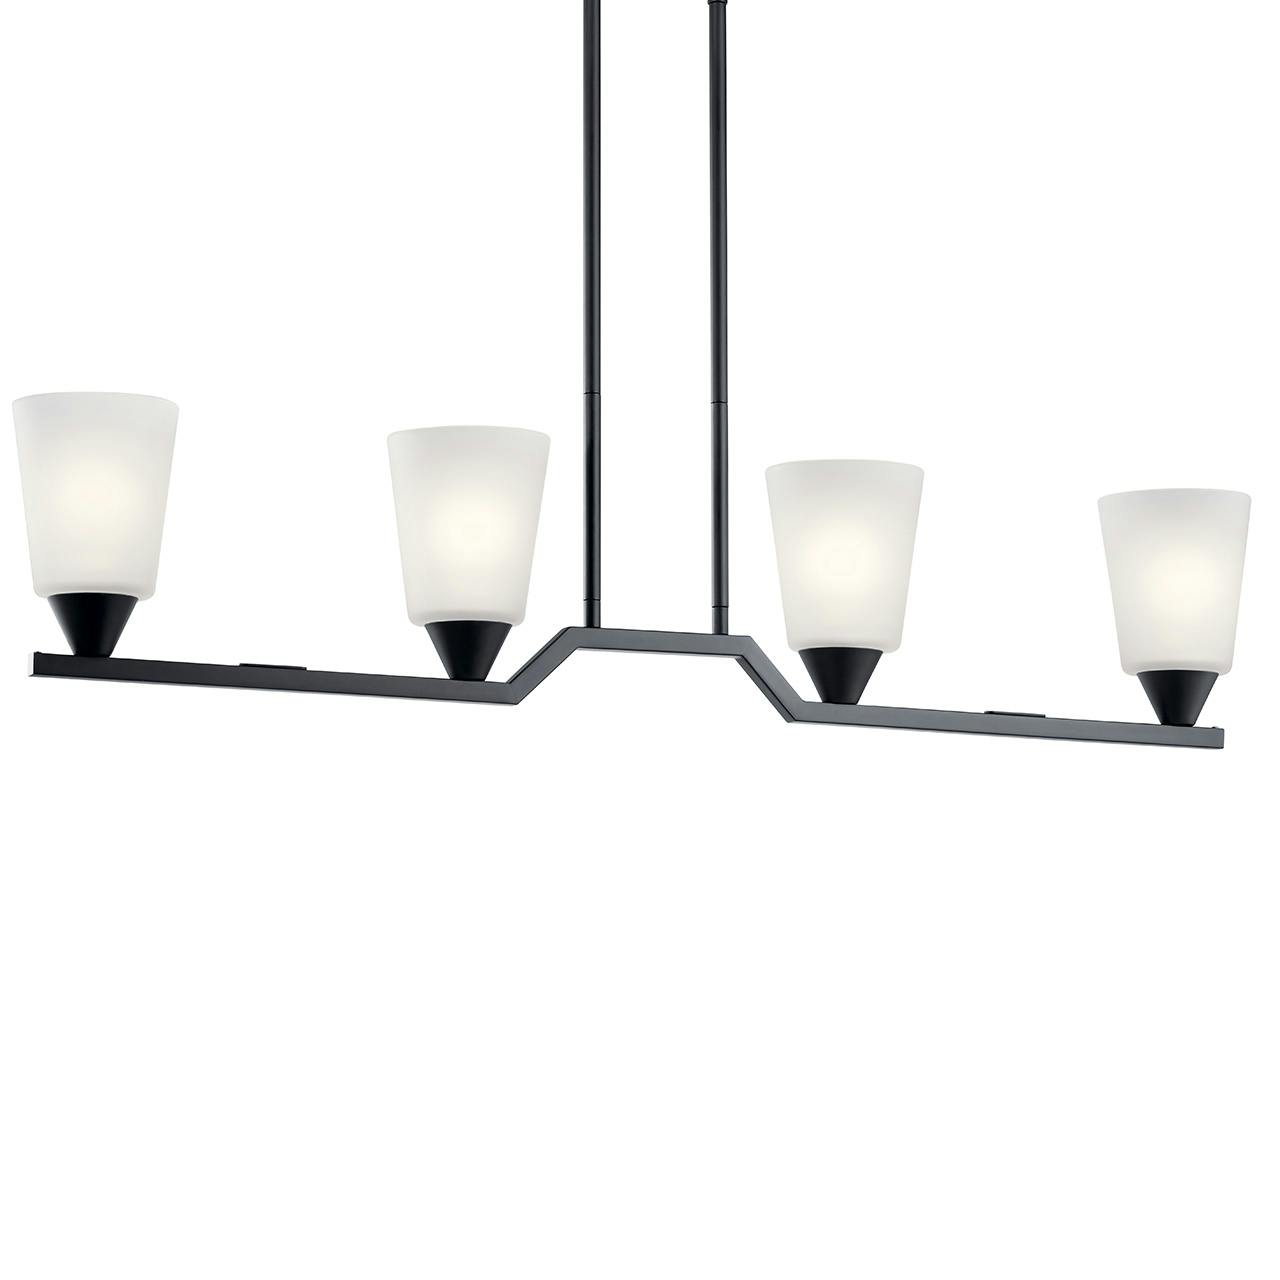 Skagos™ 4 Light Linear Chandelier Black without the canopy on a white background